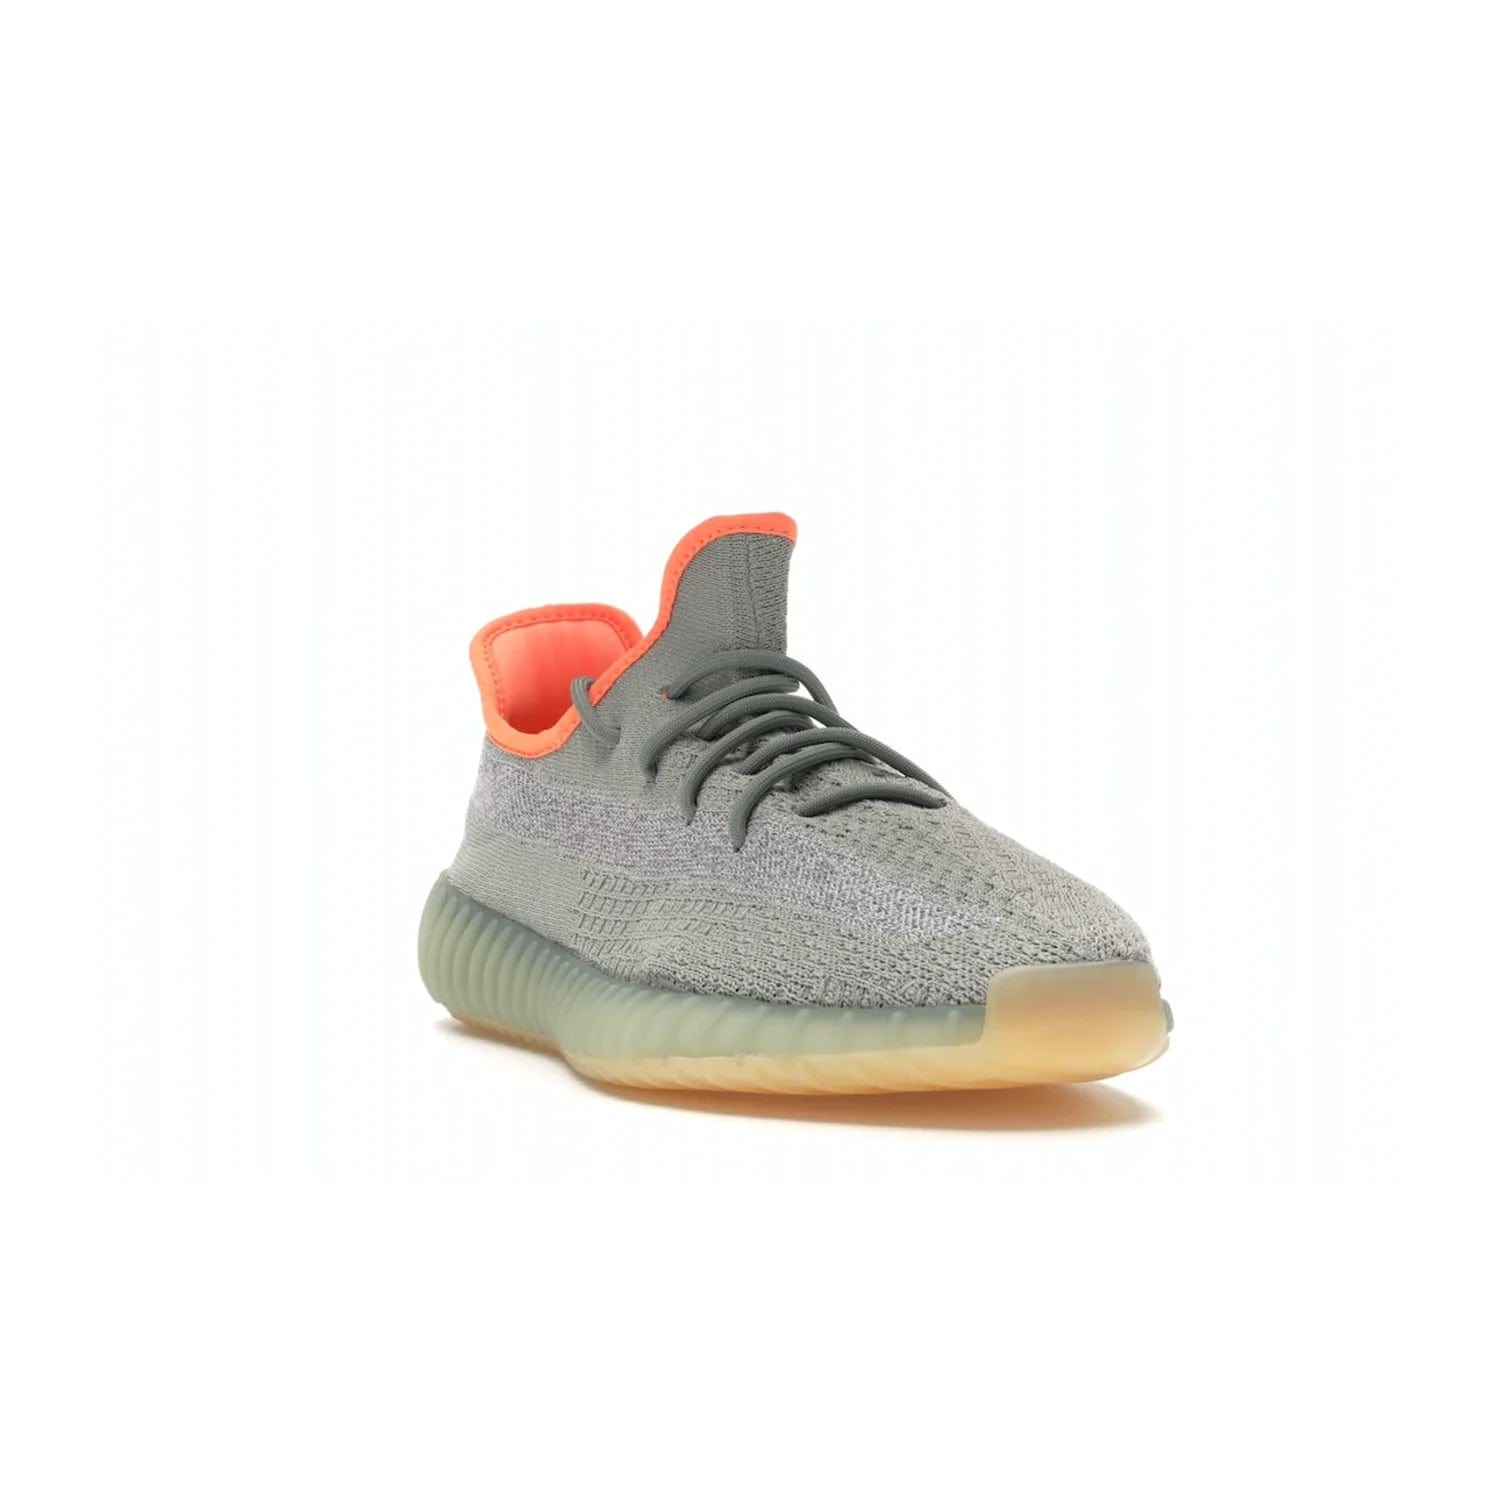 adidas Yeezy Boost 350 V2 Desert Sage - Image 7 - Only at www.BallersClubKickz.com - Upgrade your style with the adidas Yeezy Boost 350 V2 Desert Sage. This 350V2 features a Desert Sage primeknit upper with tonal side stripe, and an orange-highlighted translucent Boost cushioning sole. Stay on-trend in effortless style.